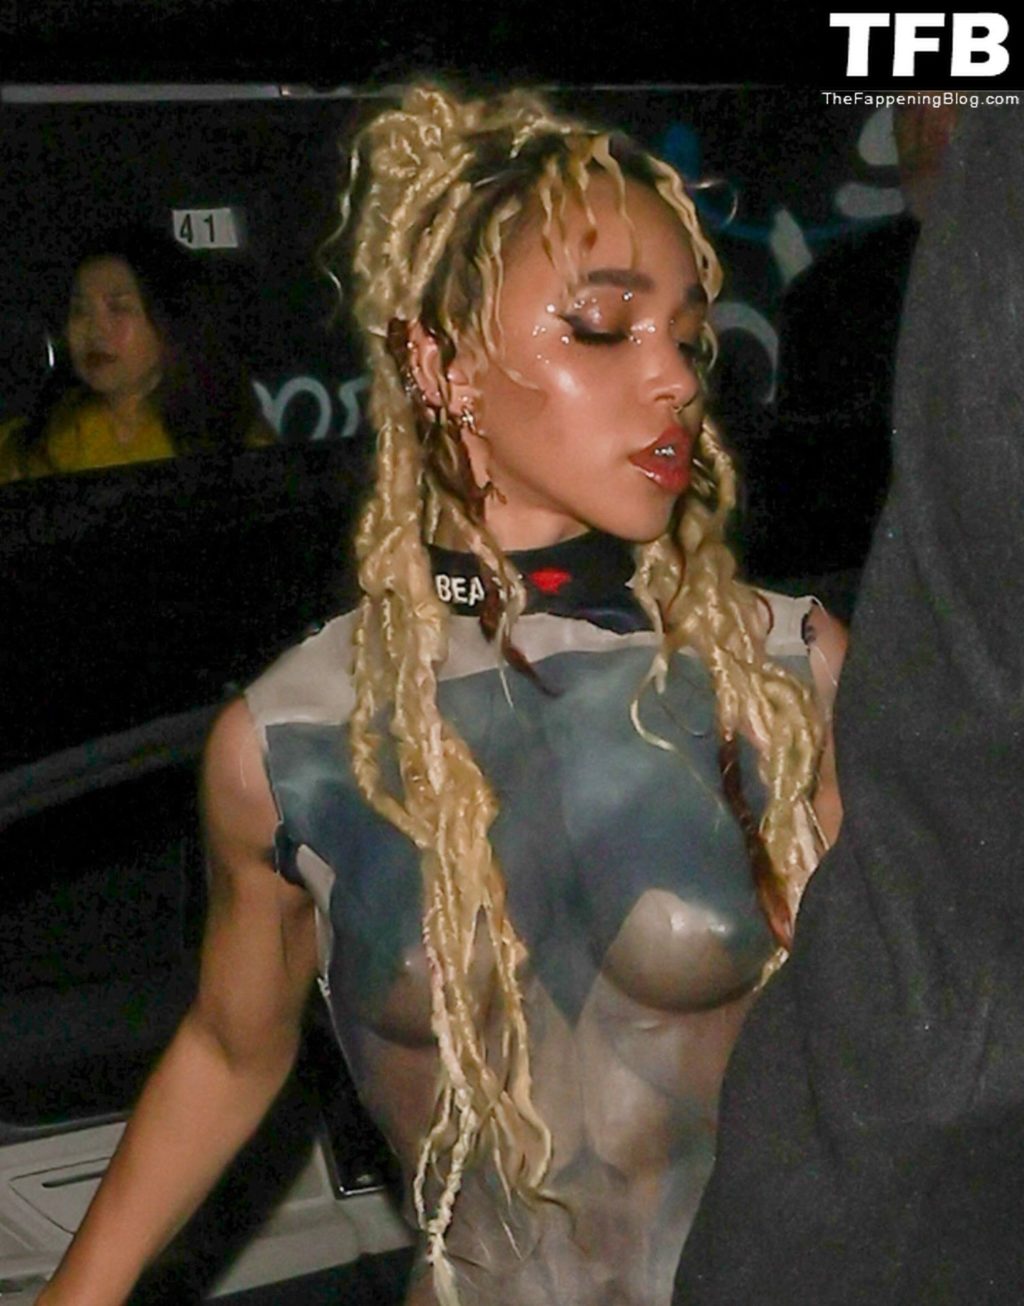 FKA Twigs Nude The Fappening Blog 13 1024x1306 - FKA Twigs Flashes Her Nude Tits & Legs the NME Awards in London (14 Photos)